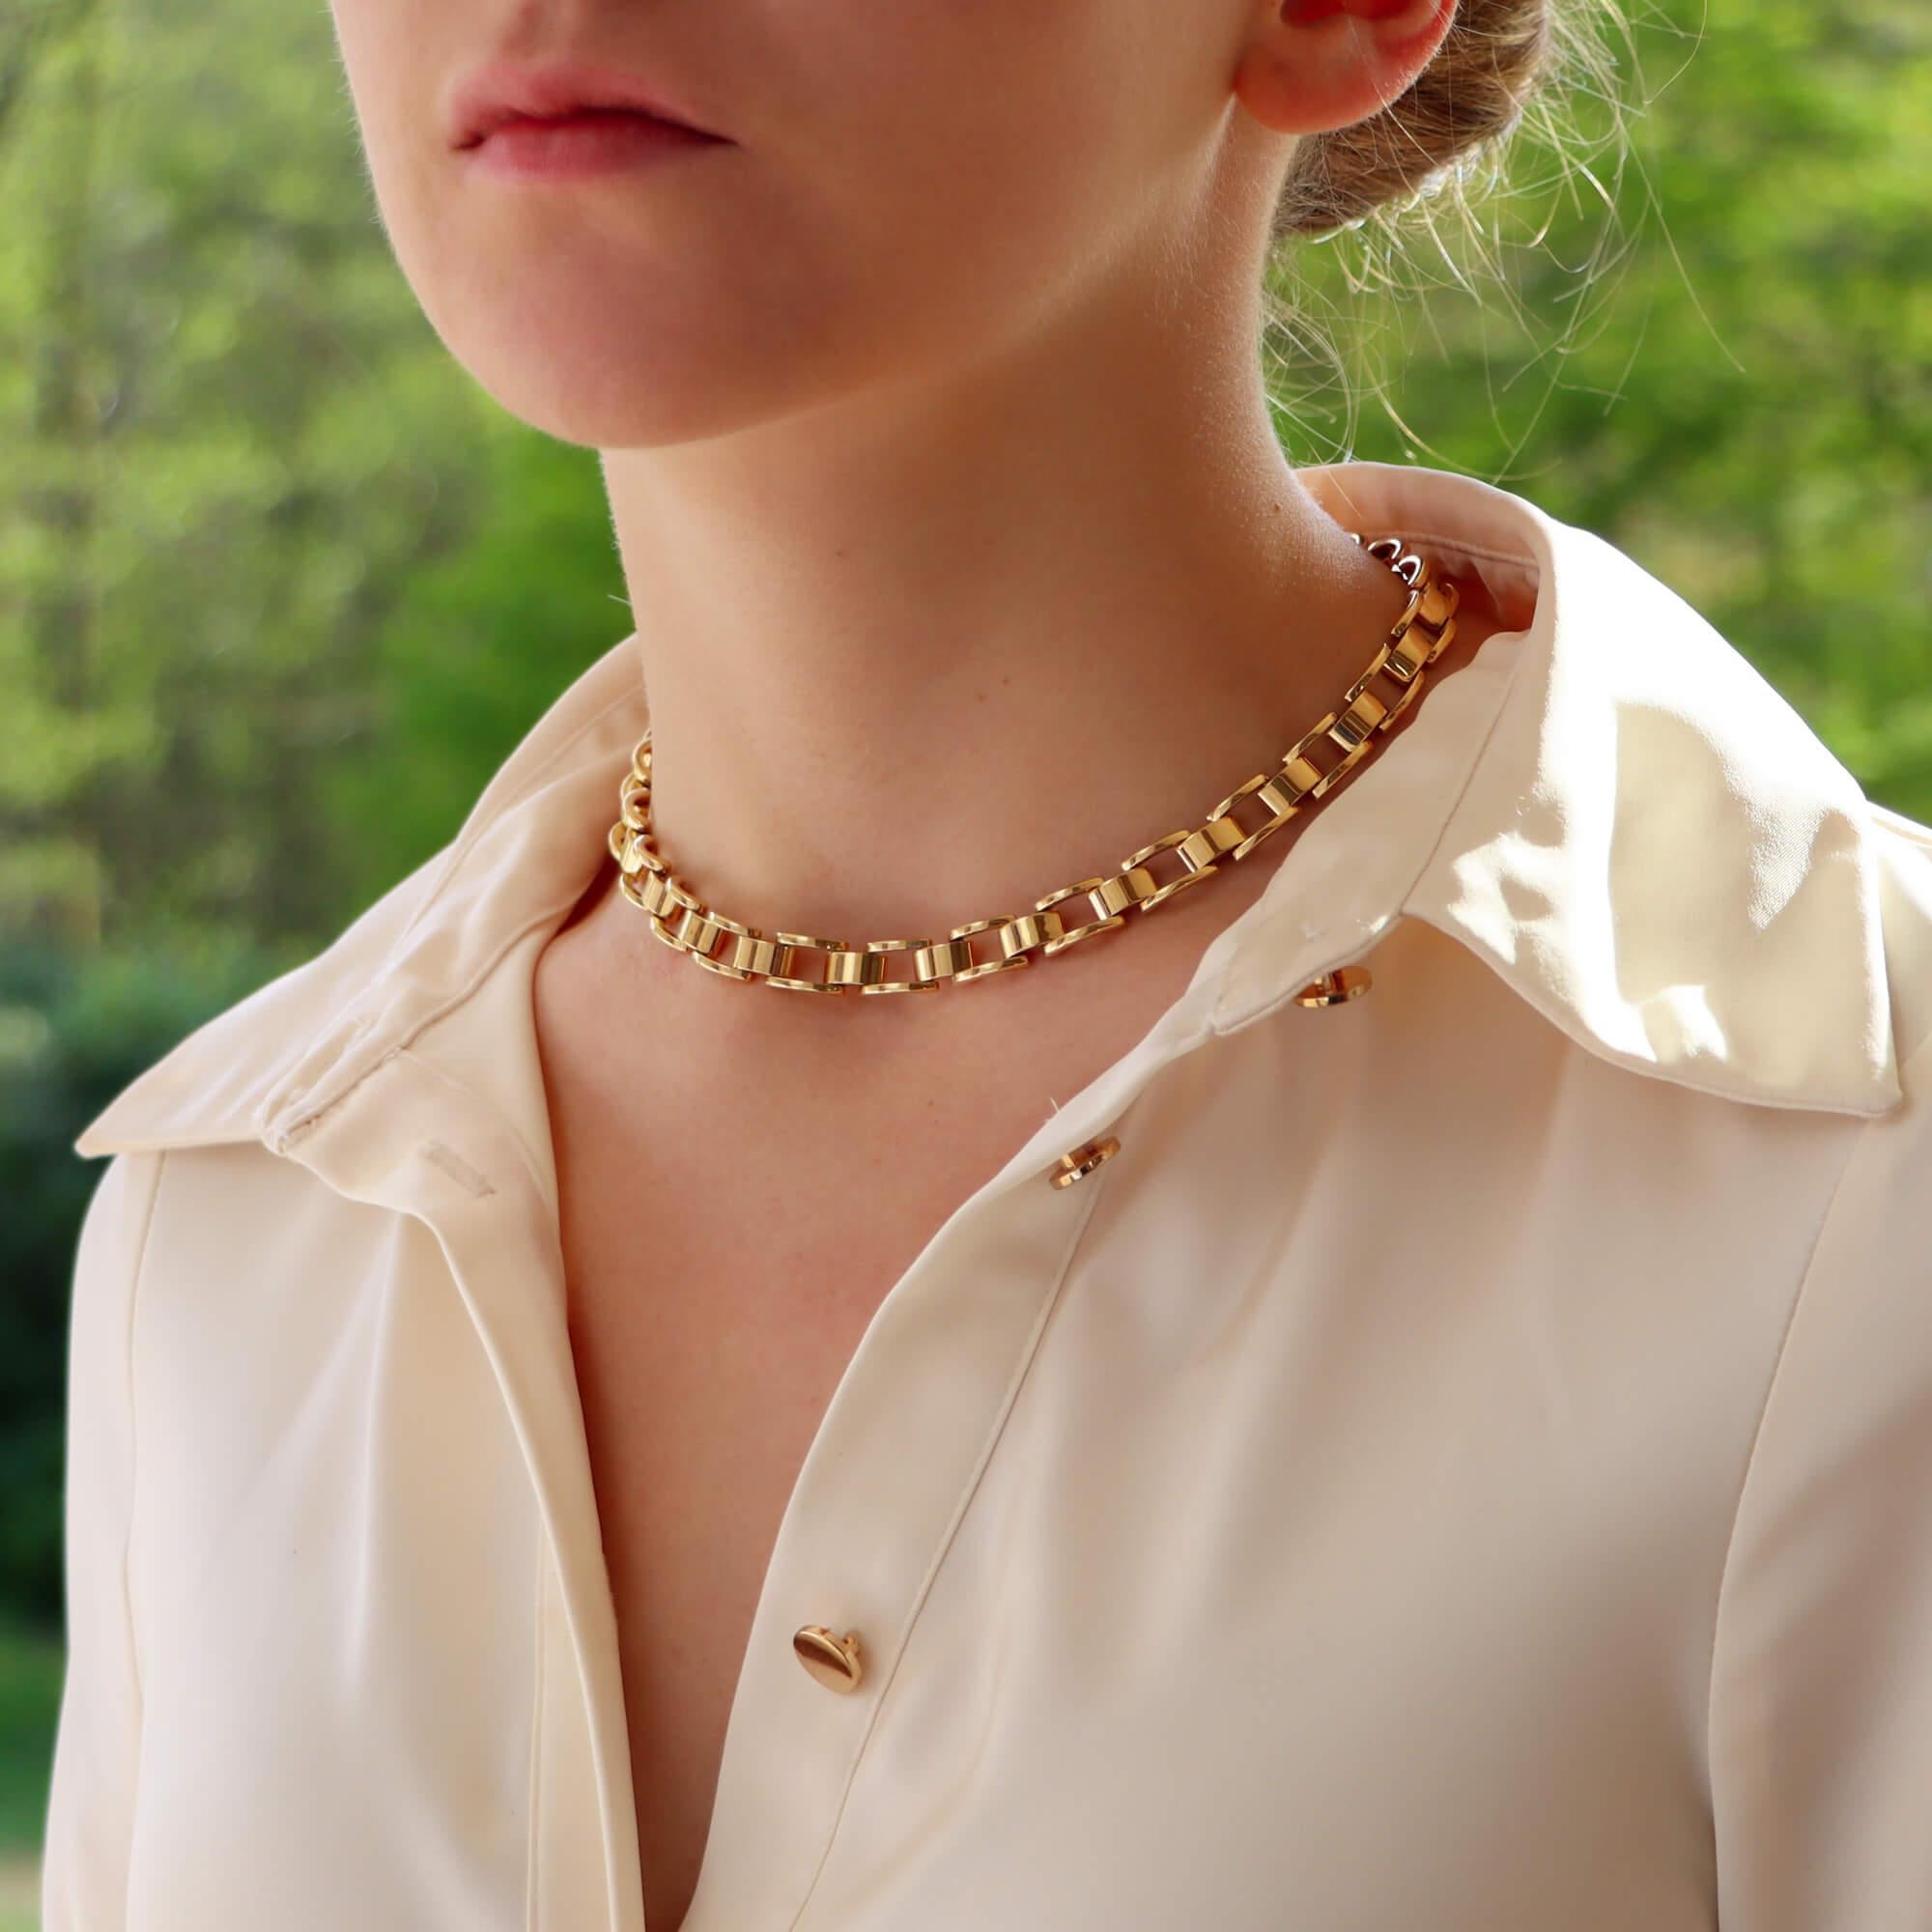  A beautiful vintage Mauboussin link necklace set in 18k yellow gold.

The necklace is composed of exactly 52 gold chunky links, connected in an articulated design so that it can sit on the wearers neck comfortably. Once on we see these lovely